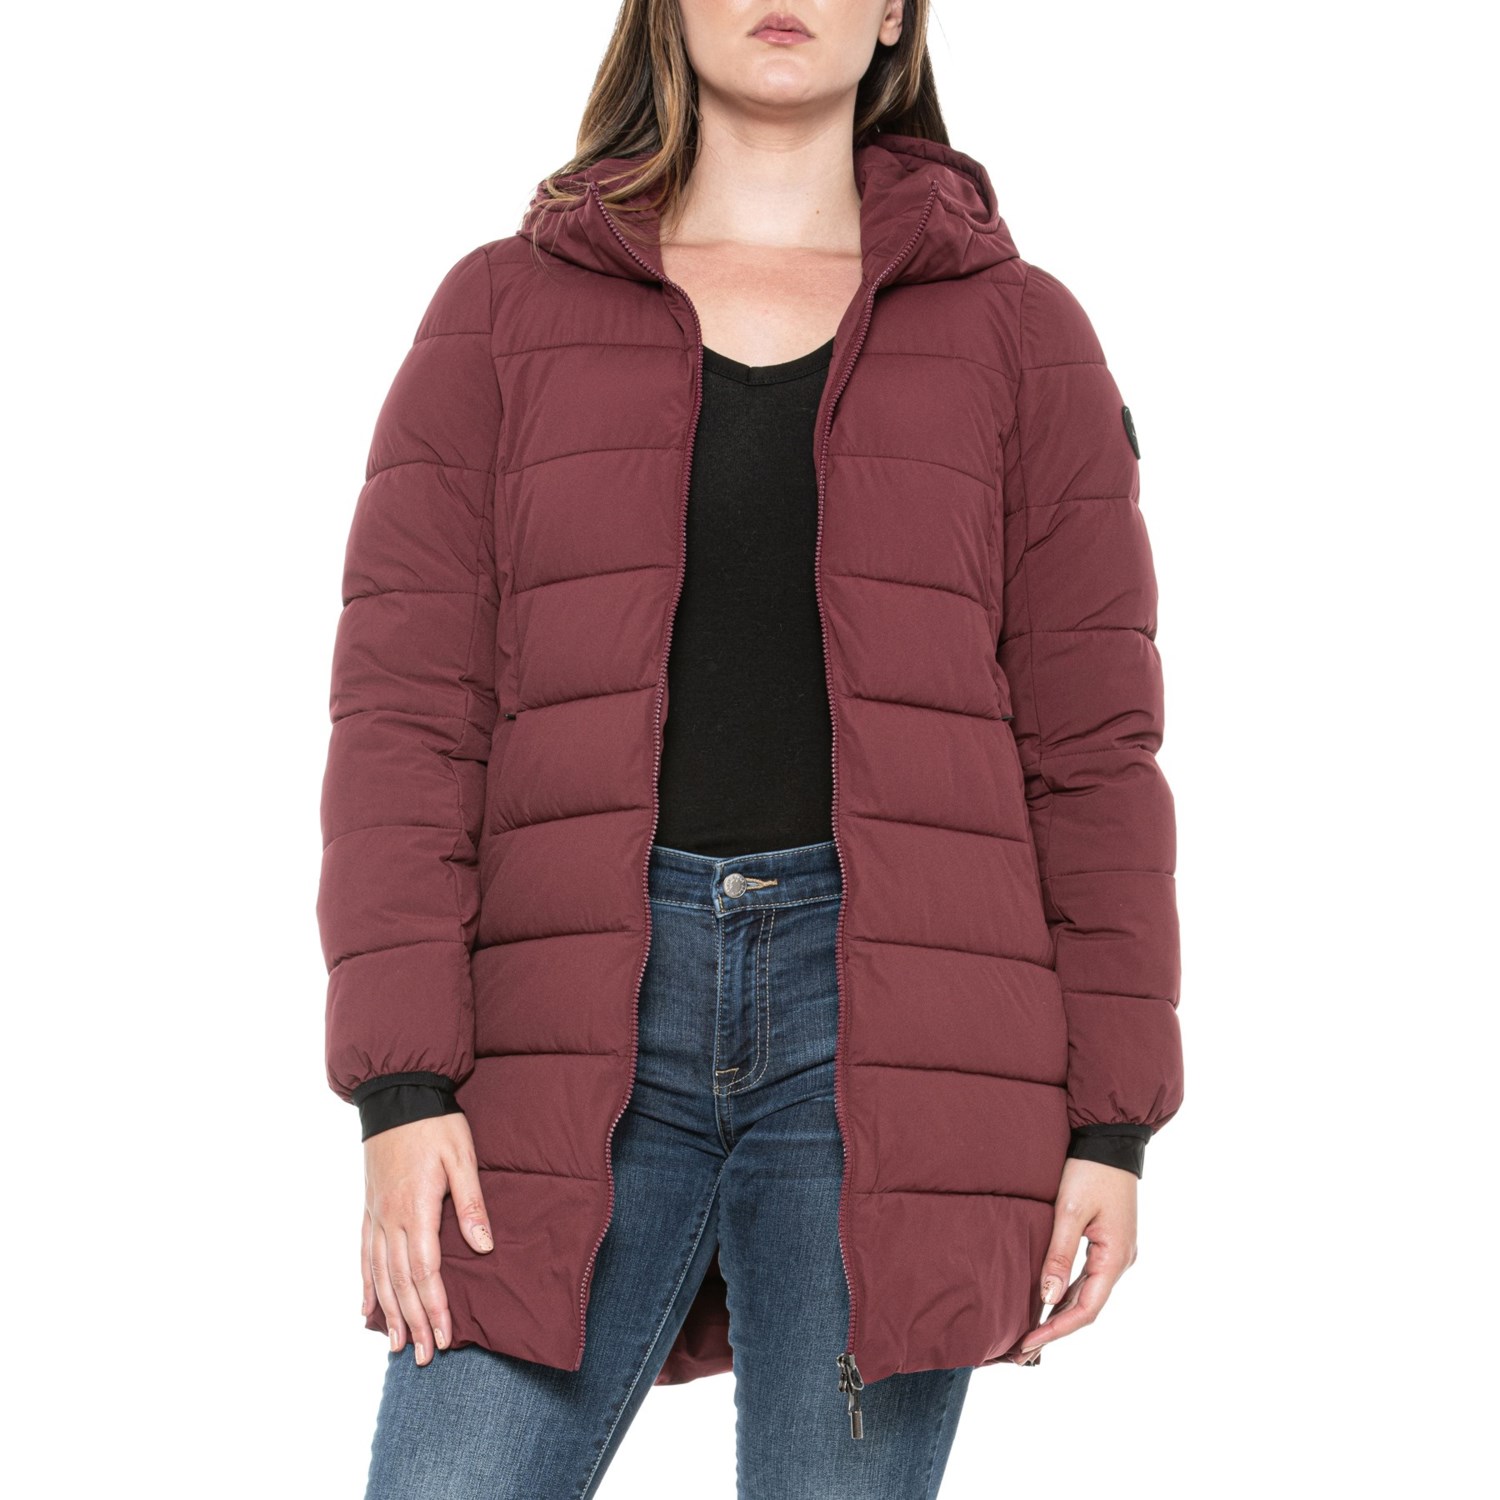 Gerry Halfmoon Stretch Active Hooded Puffer Jacket - Insulated - Save 49%